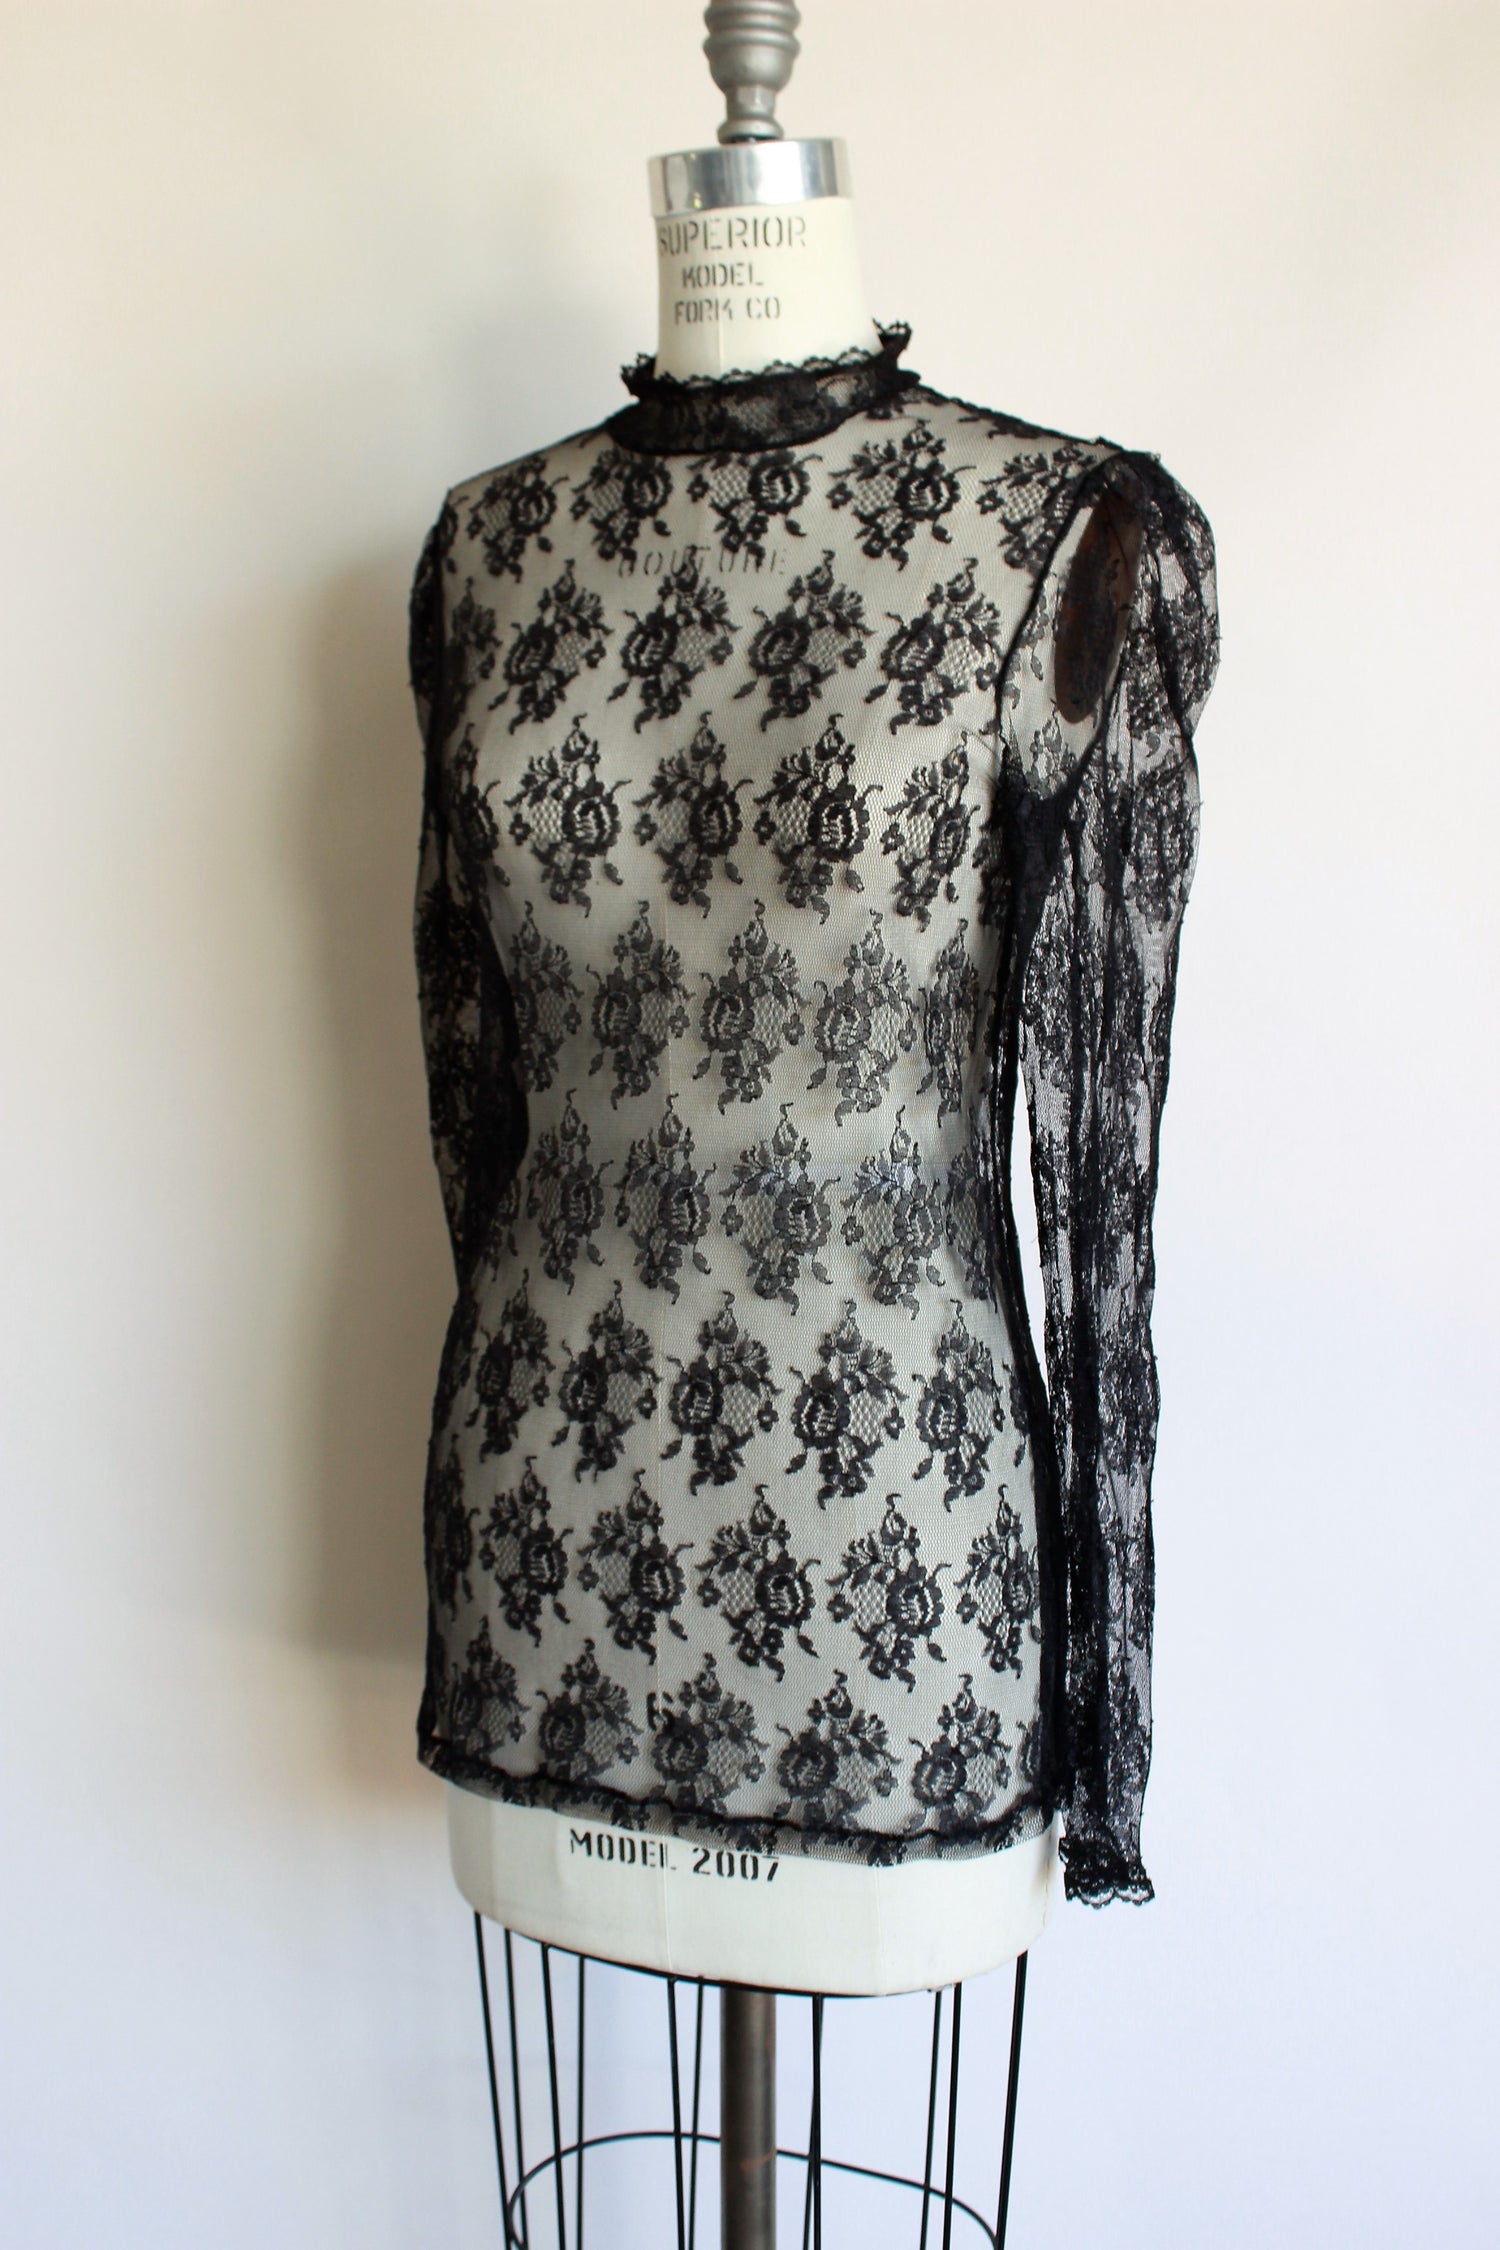 Vintage Black Applique and Lace Sheer Top Selected by Love Rocks Vintage